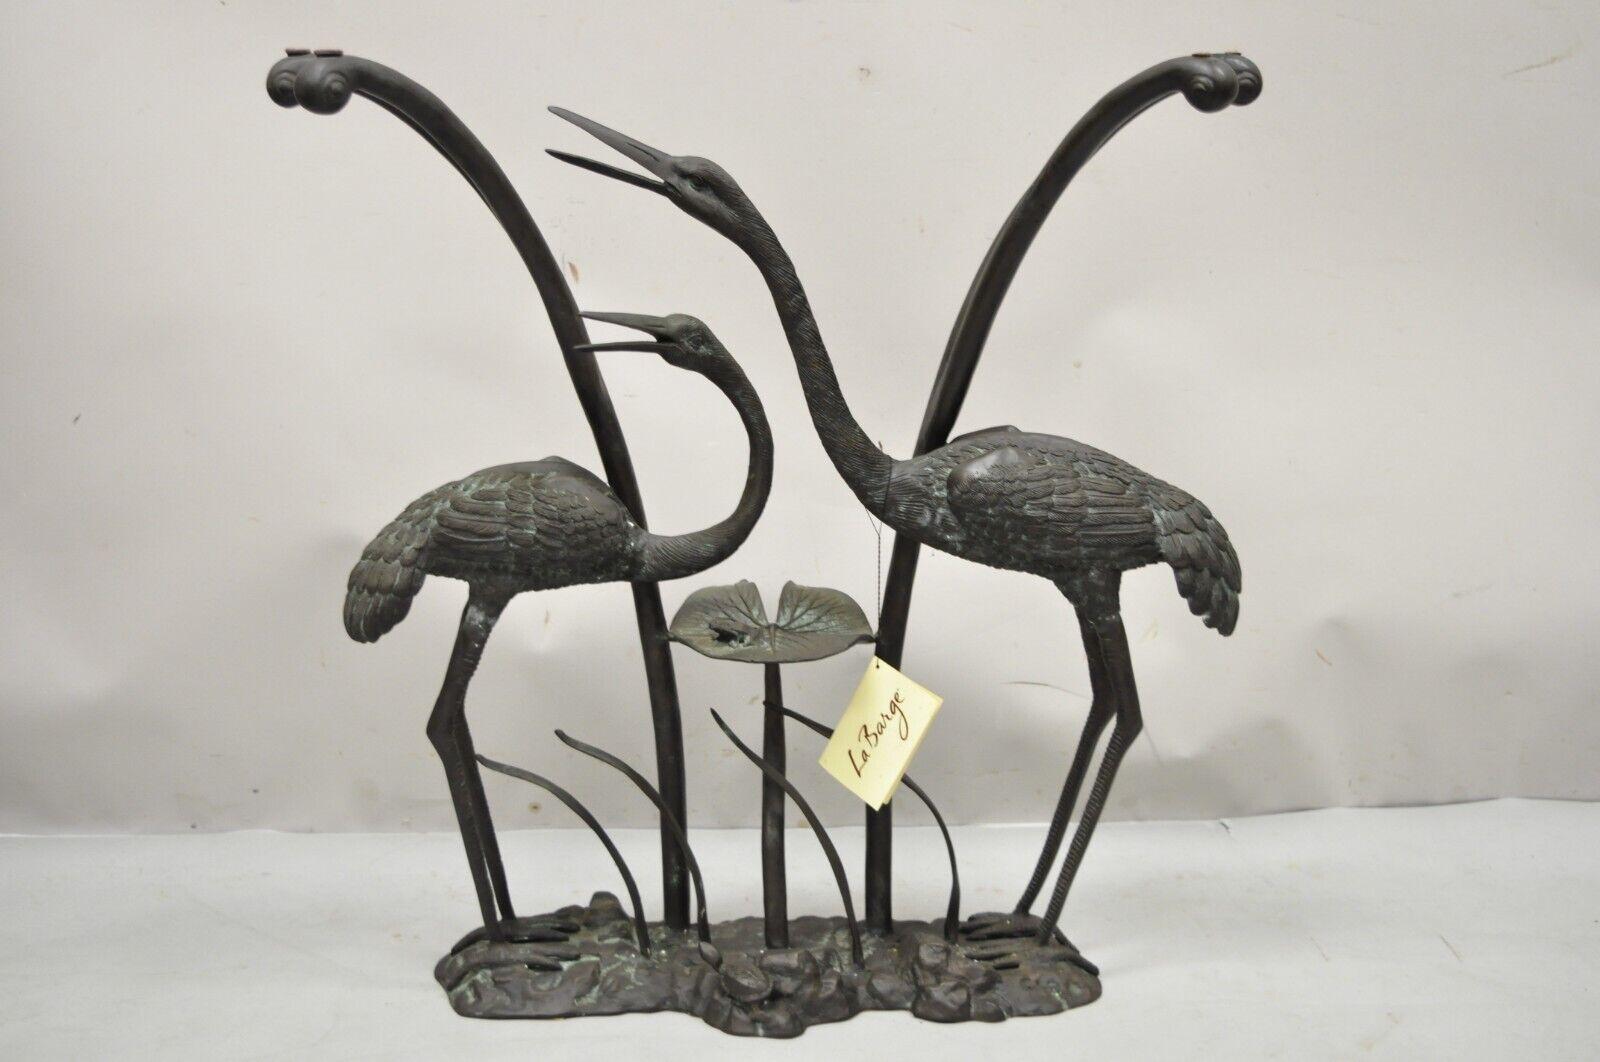 Labarge bronze crane bird lily pad glass top console sofa hall table. Item features a cast bronze base with crane birds and a frog on a lily pad, shaped glass top, desirable patina to metal. Circa 1980. Measurements: 29.5